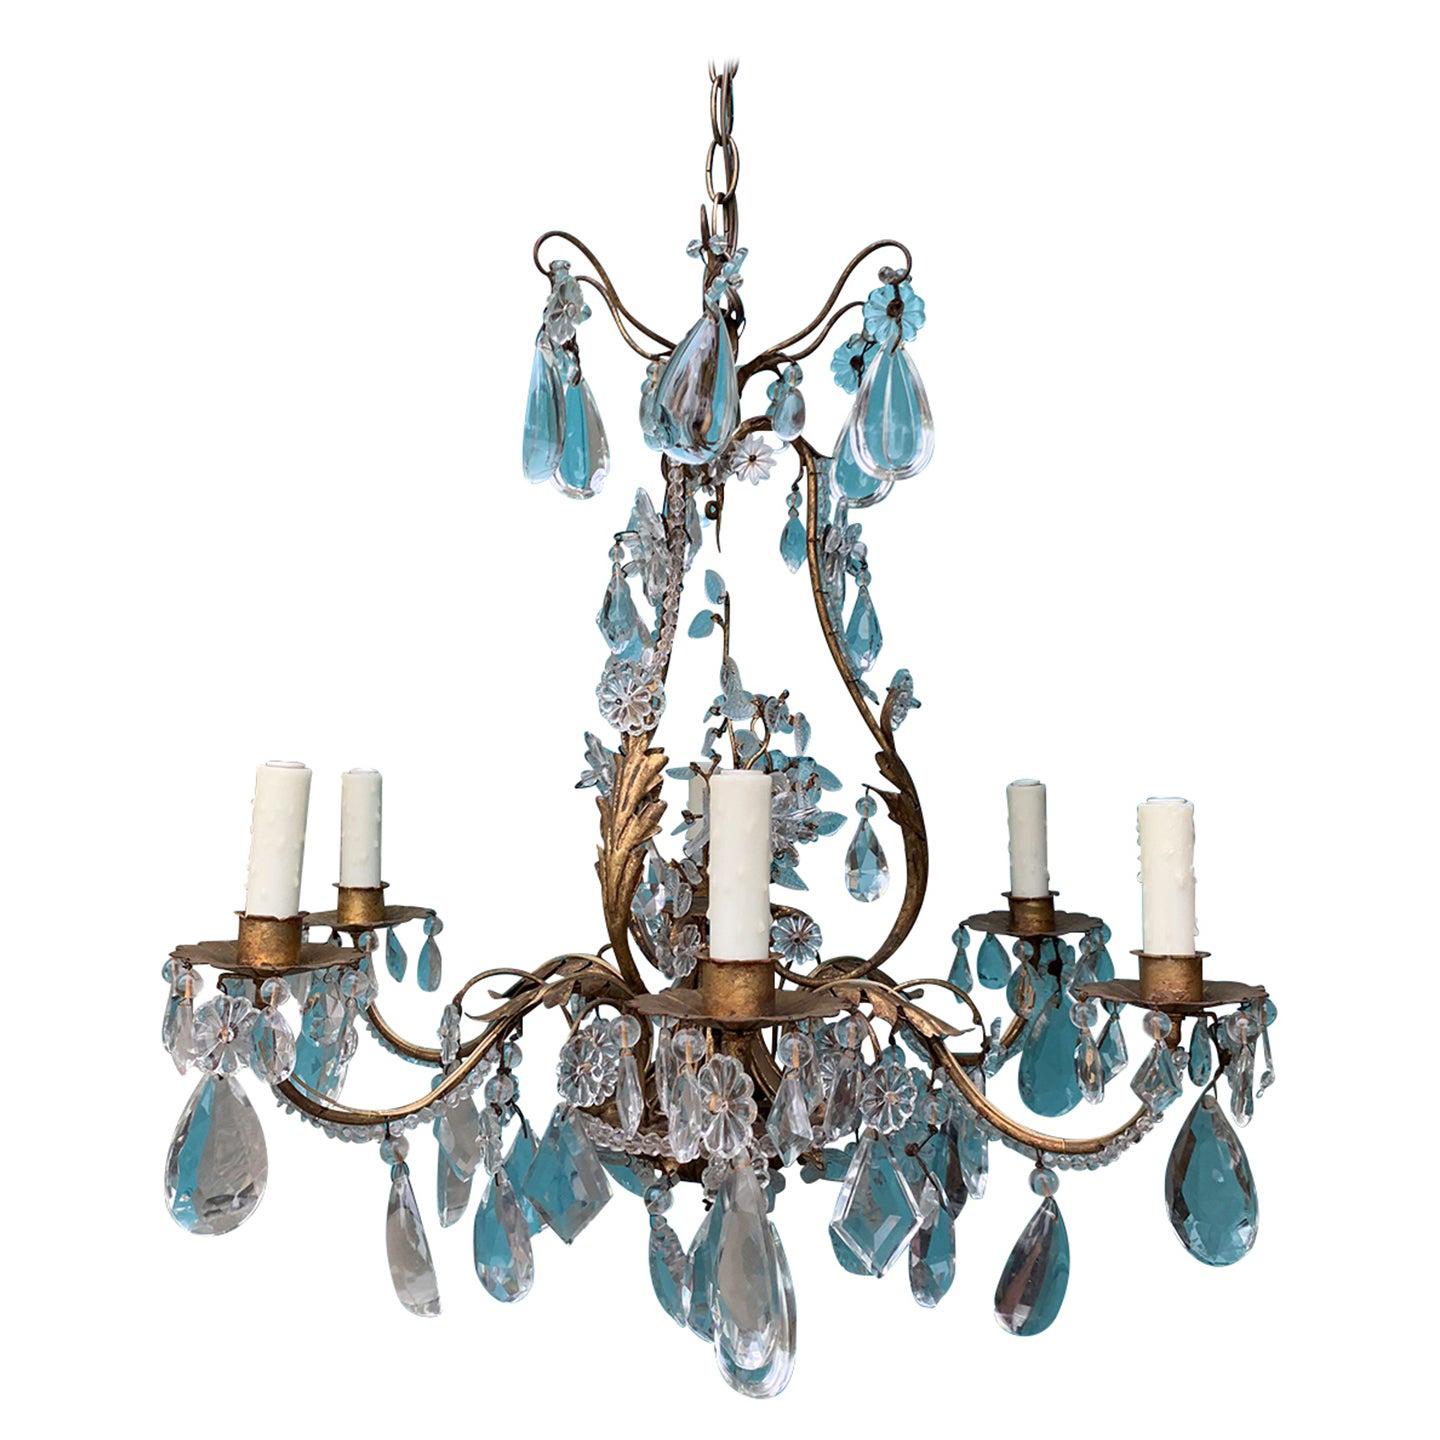 20th Century Crystal Six-Arm Chandelier Attributes to Maison Bagues